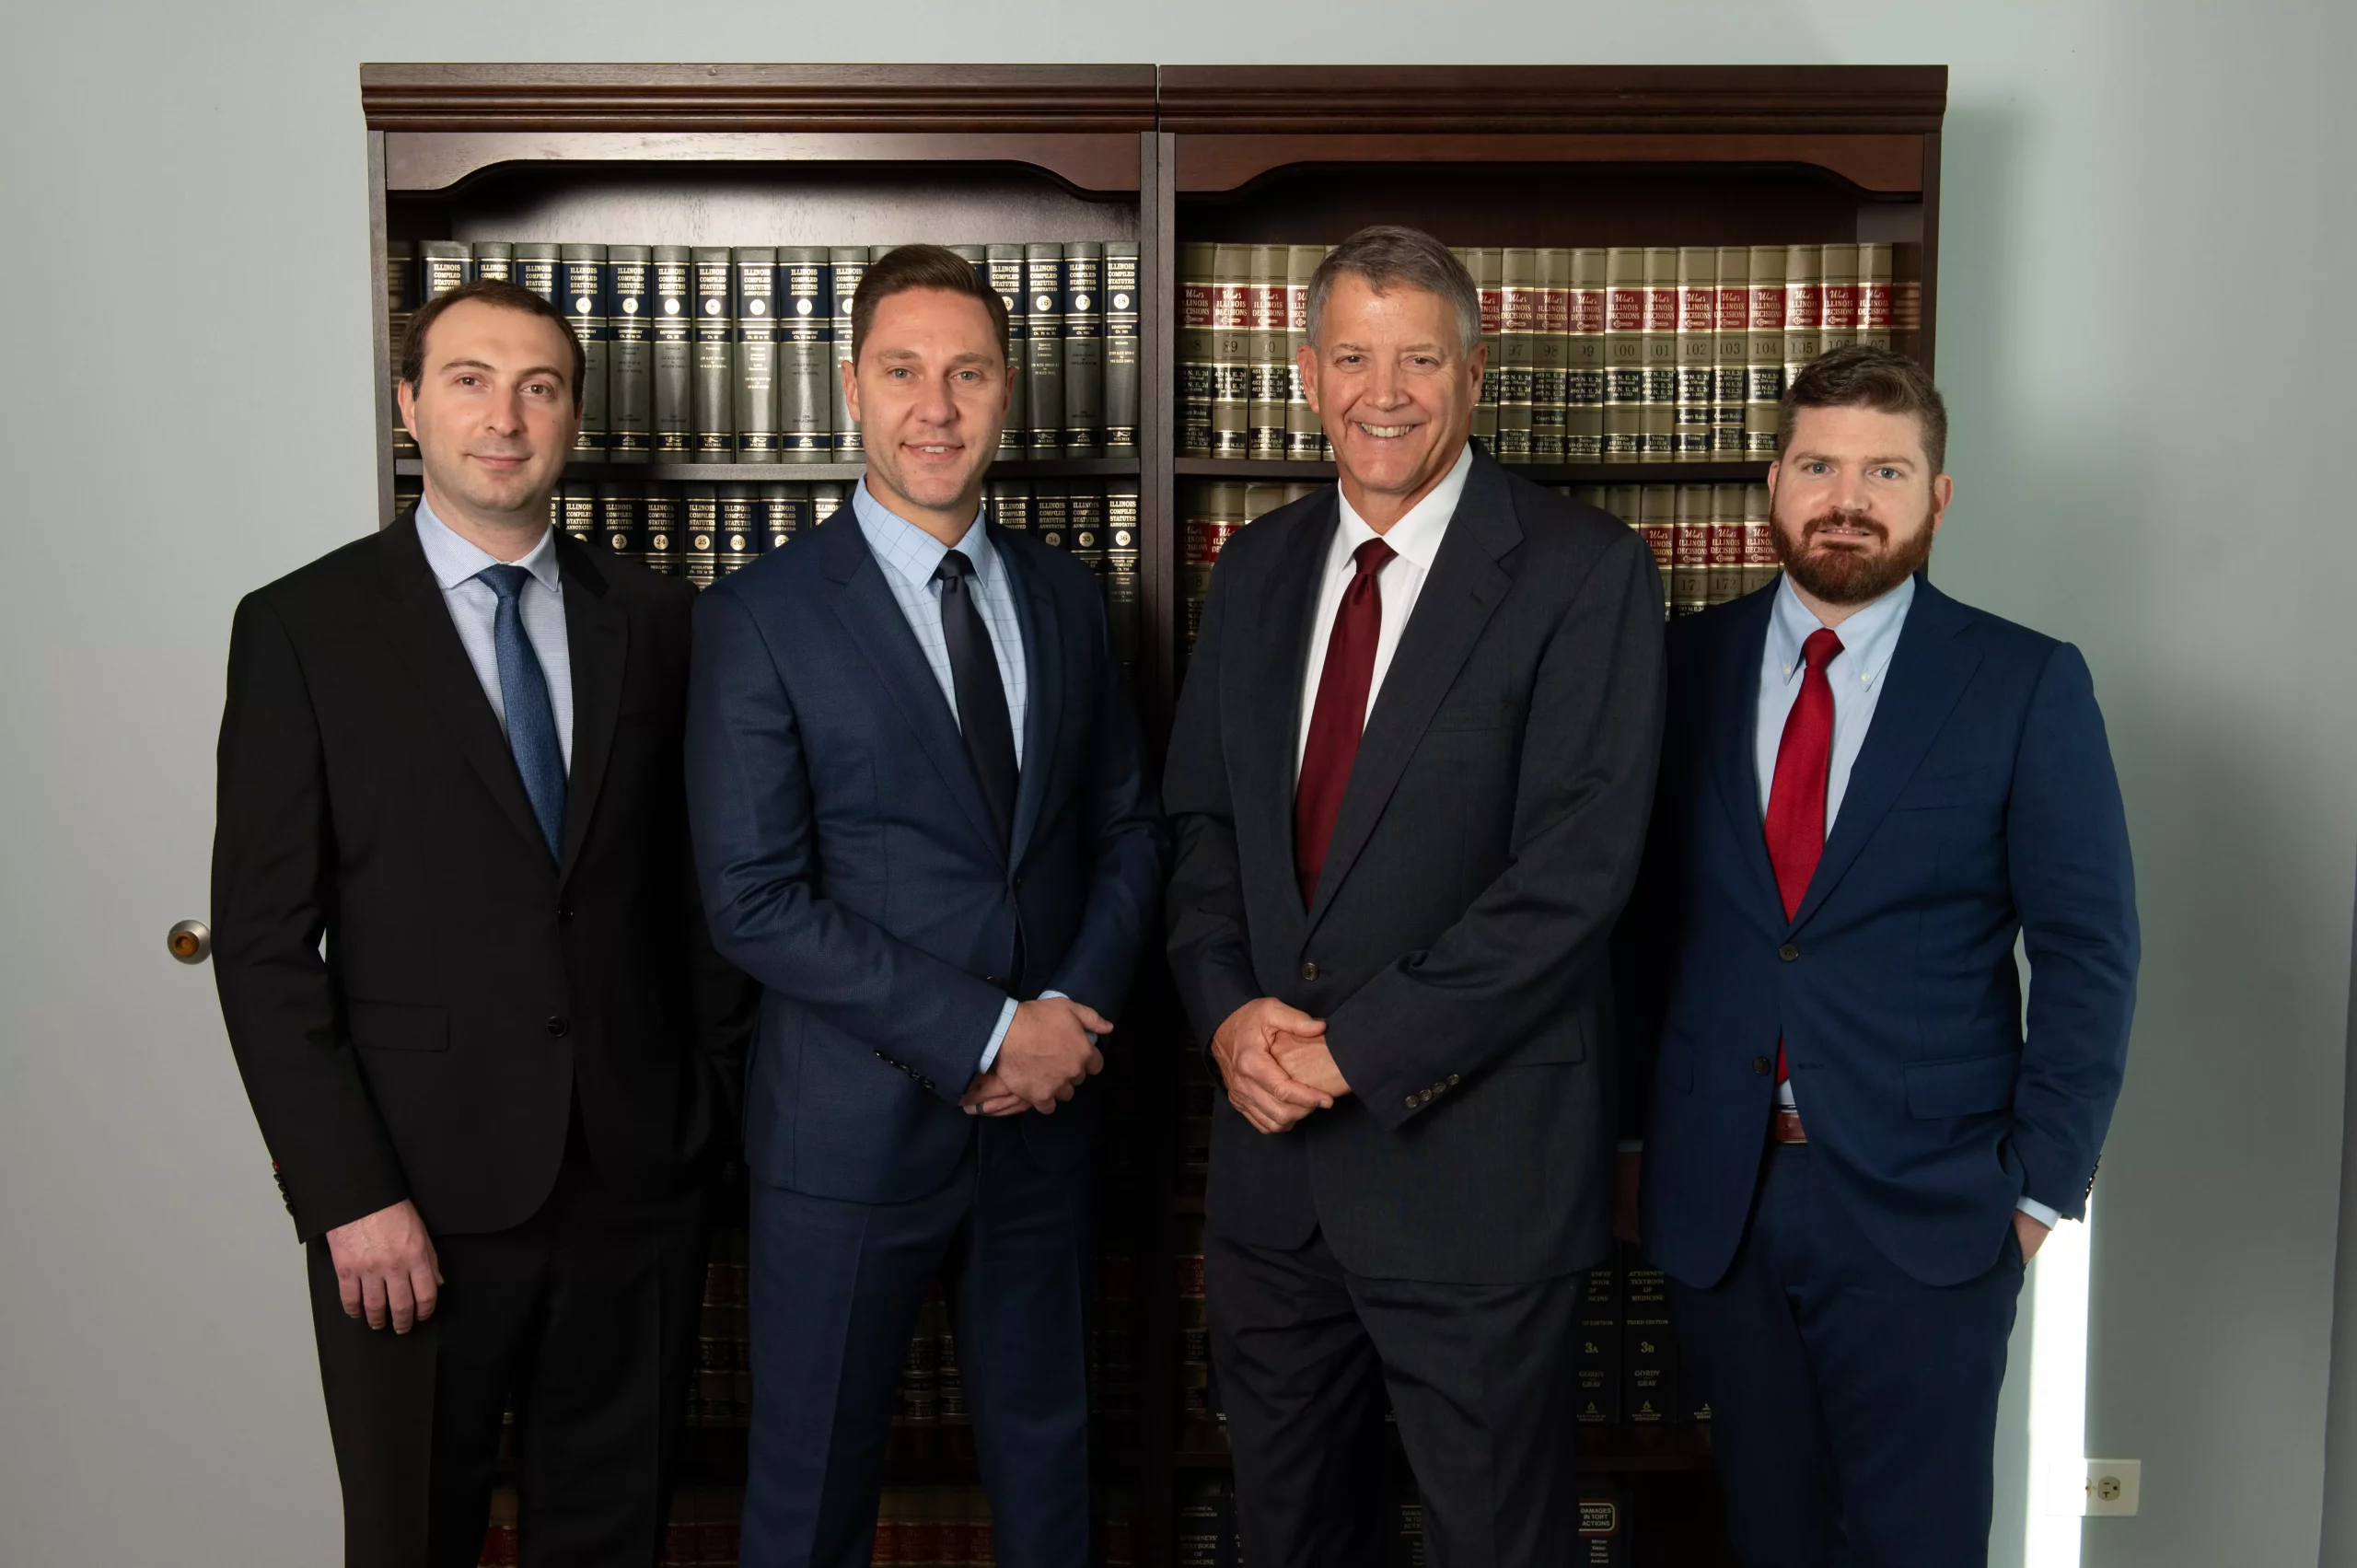 Kevin M. O'Brien and Associates: Chicago's leading personal injury and workers' compensation attorneys.